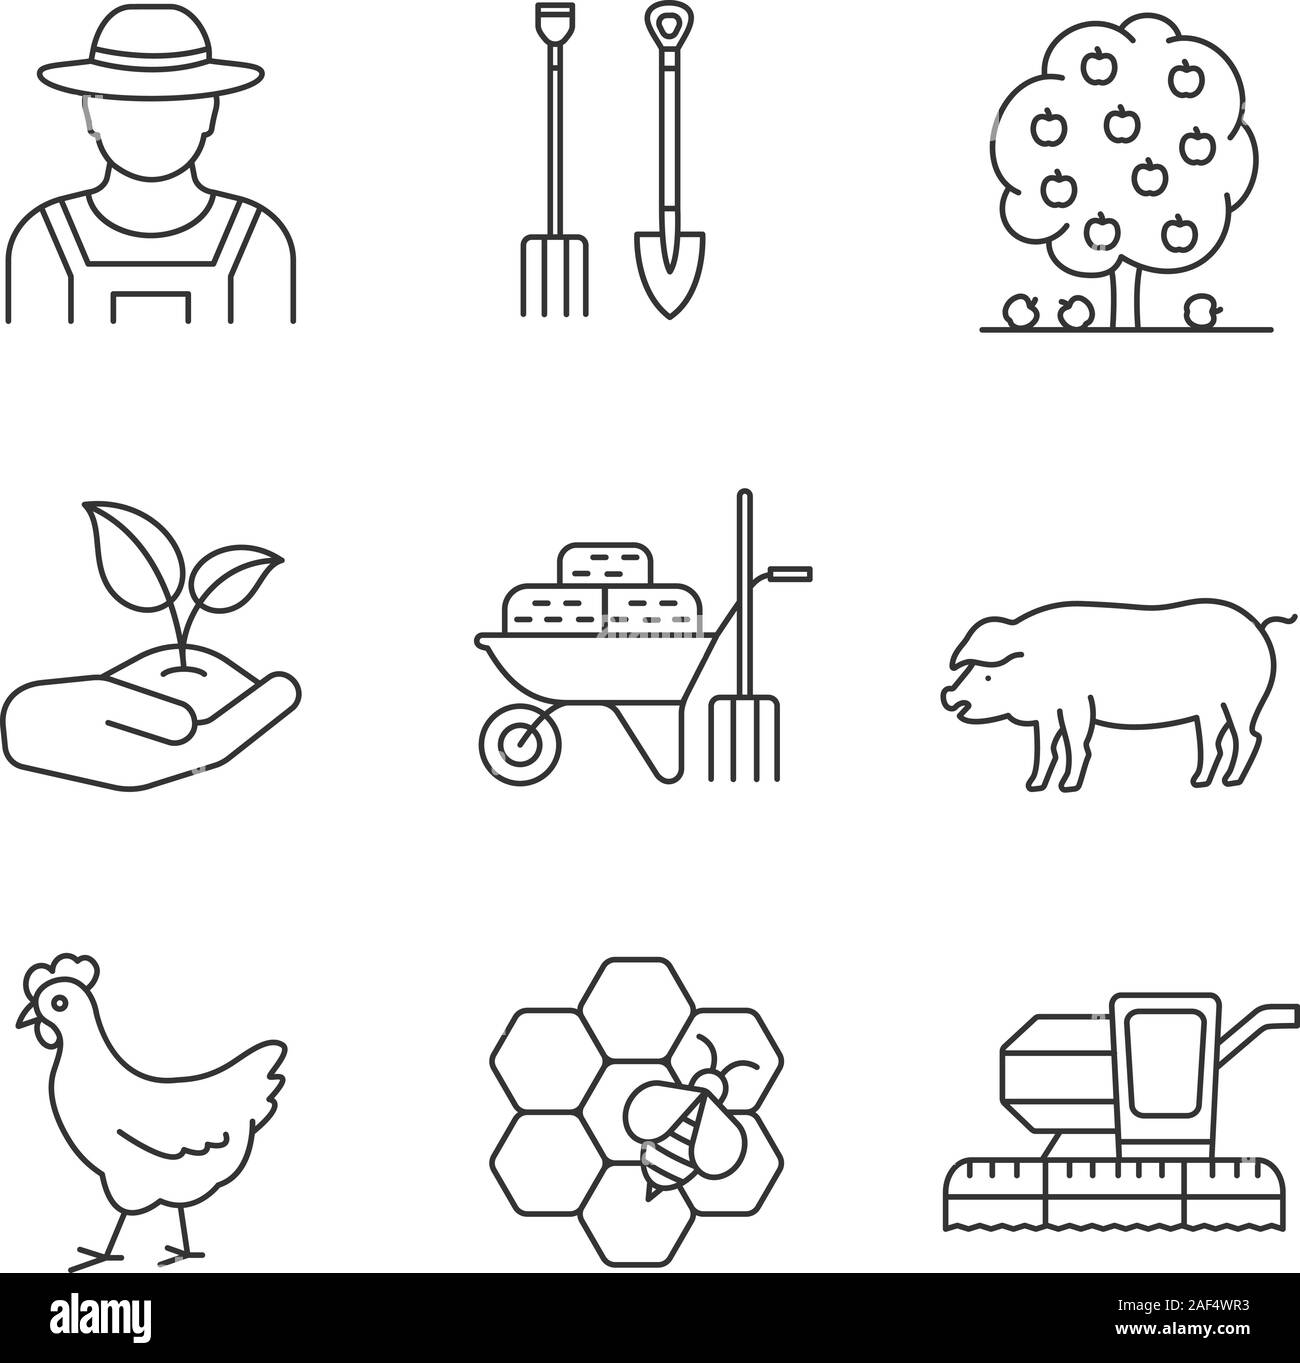 Agriculture linear icons set. Farmer, pitchfork, shovel, fruit tree, sprout, wheelbarrow, pig, chicken, beekeeping, combine harvester. Thin line conto Stock Vector